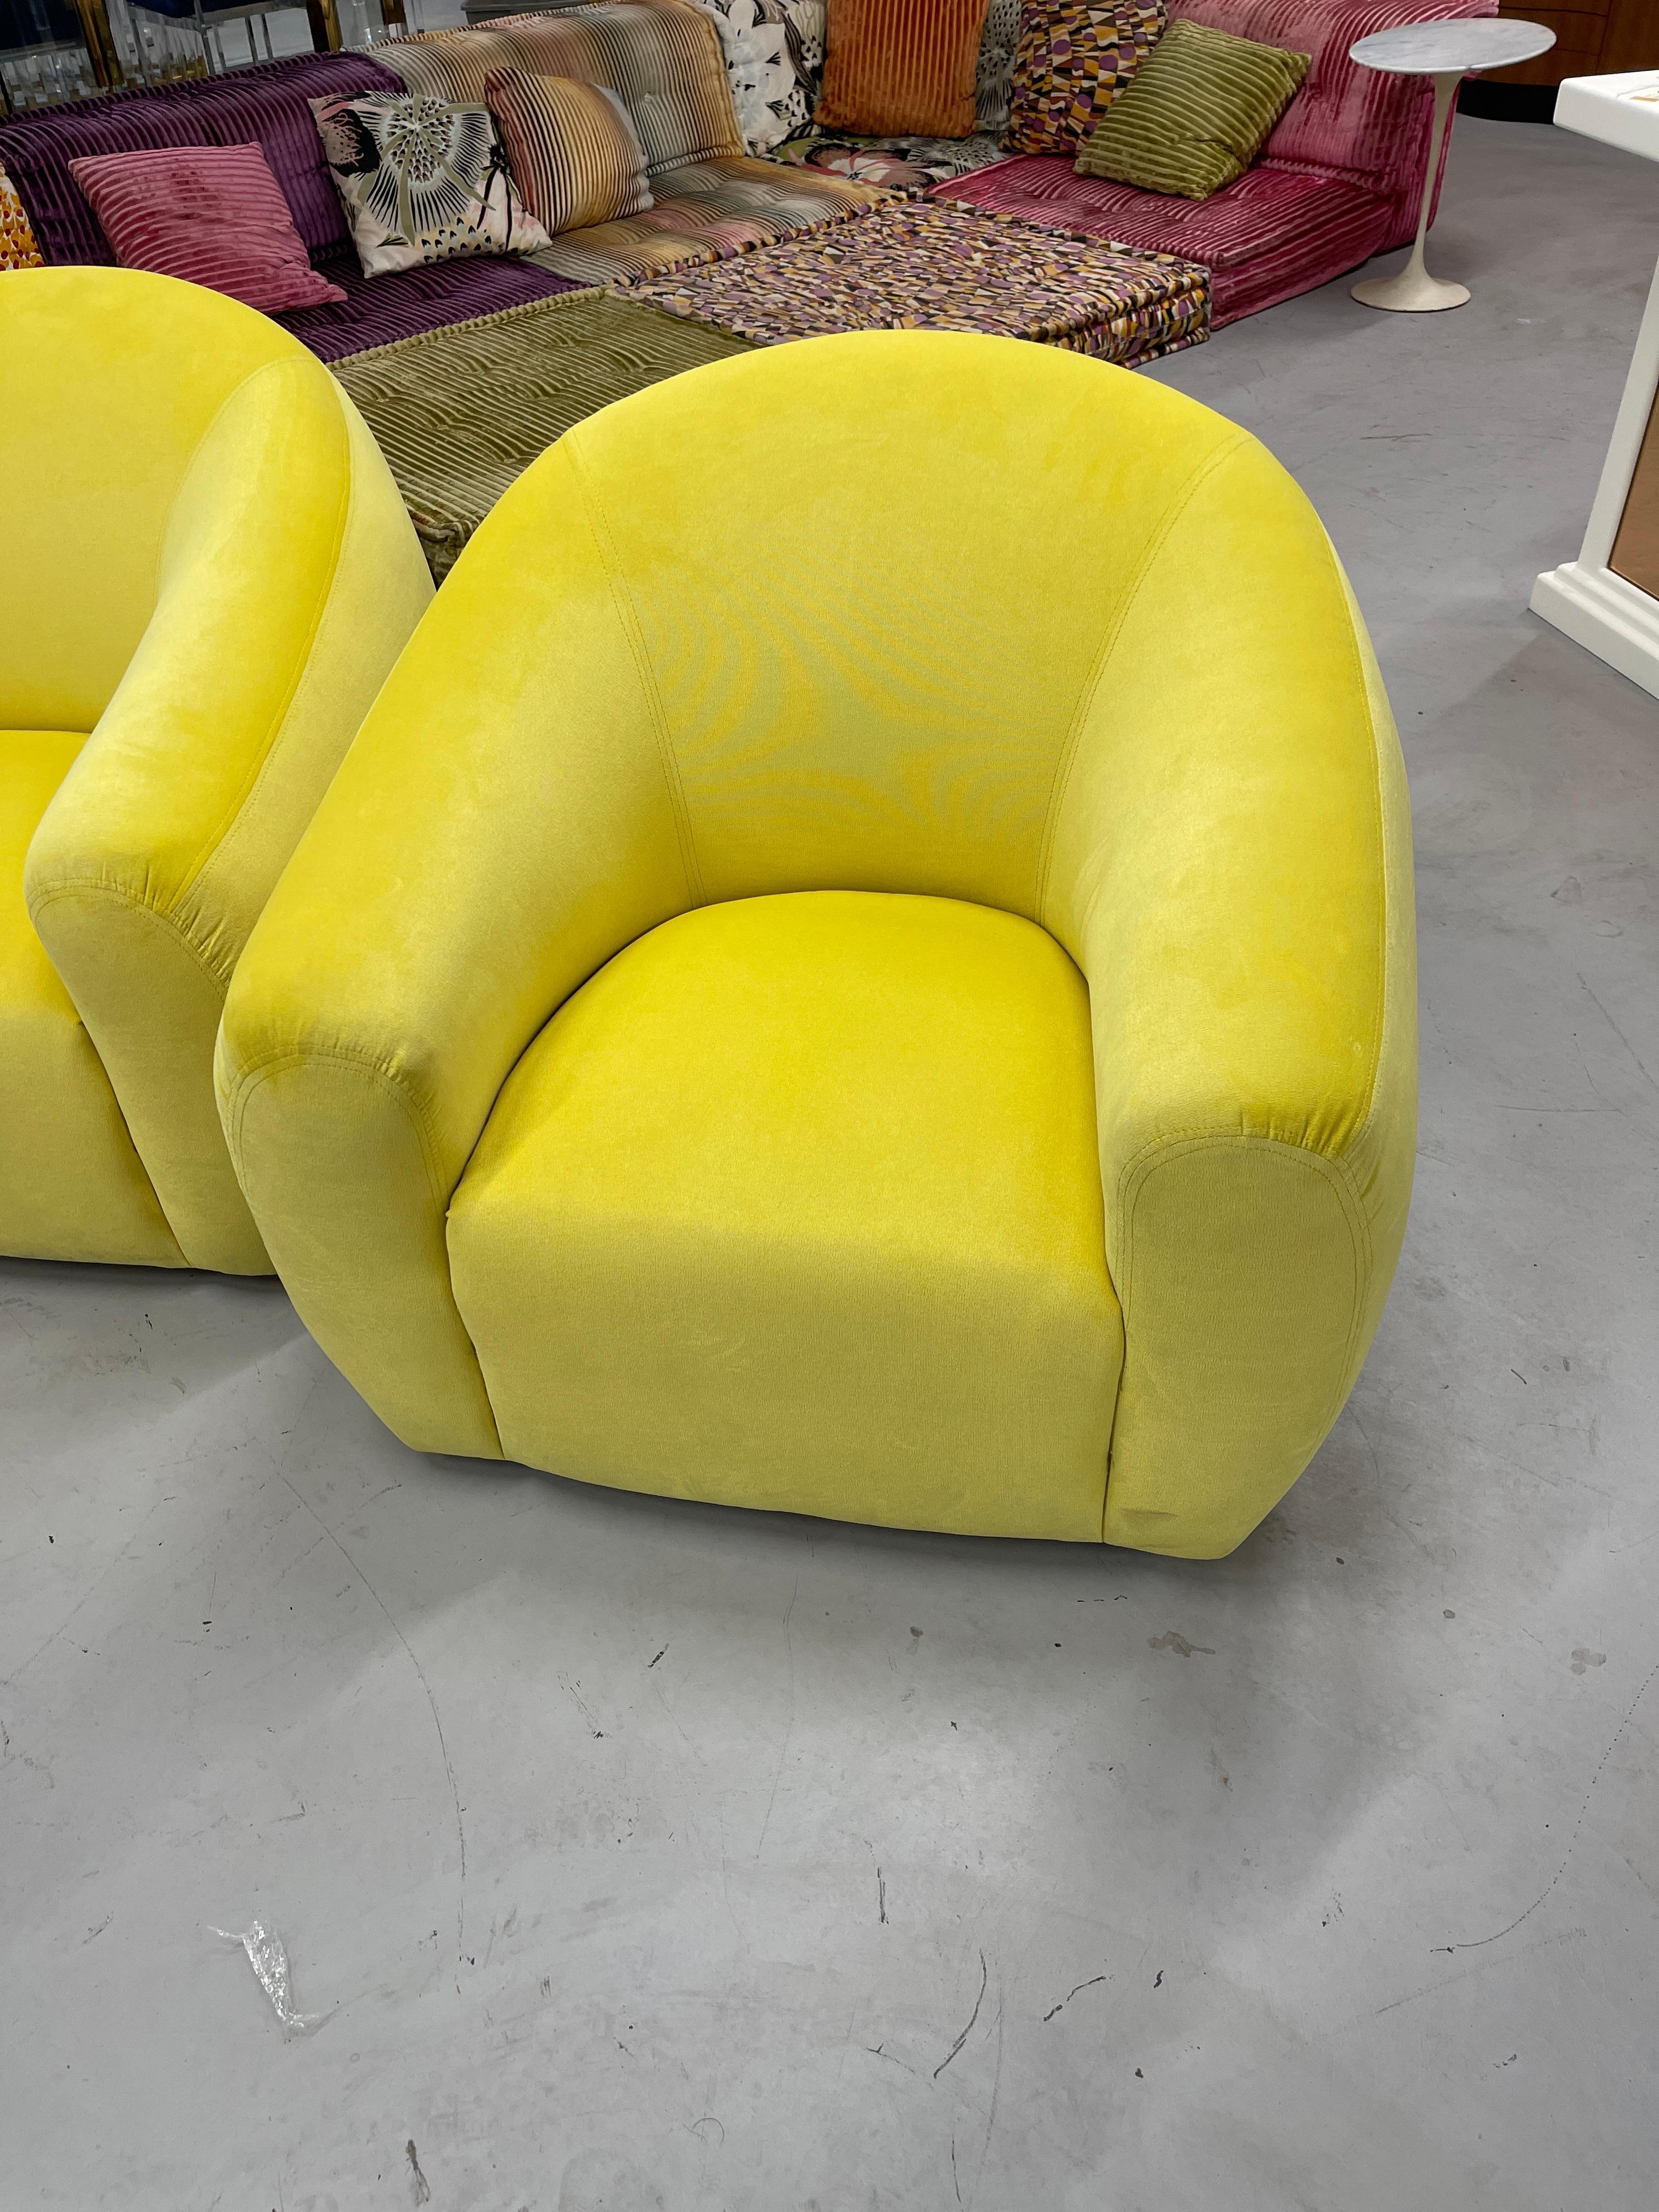 A Rudin Swivel Chairs in Limon Kravet Fabric 1